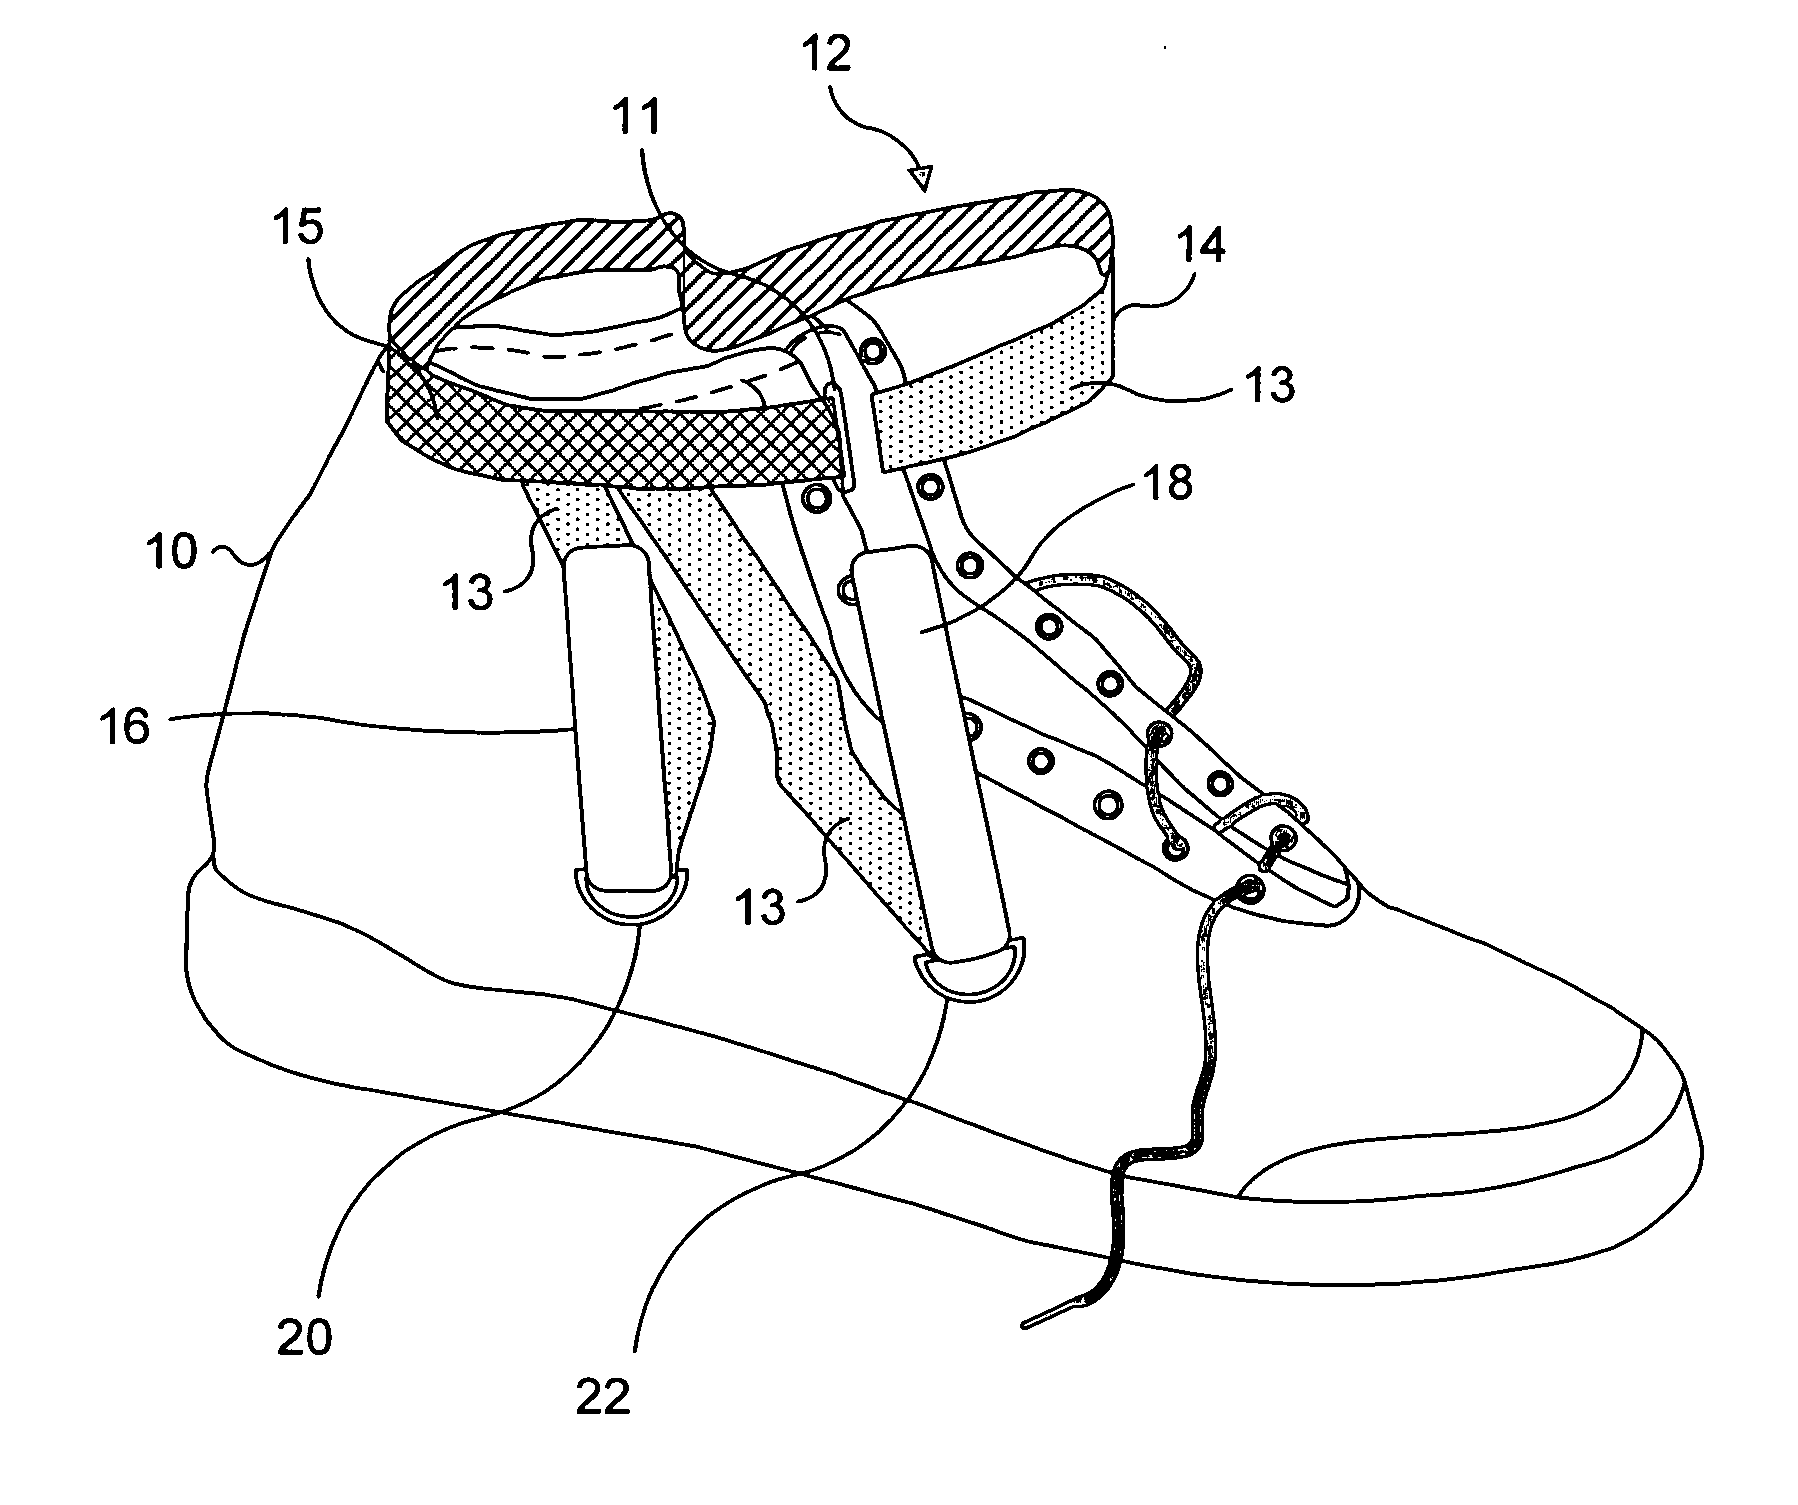 Ankle and foot stabilization support